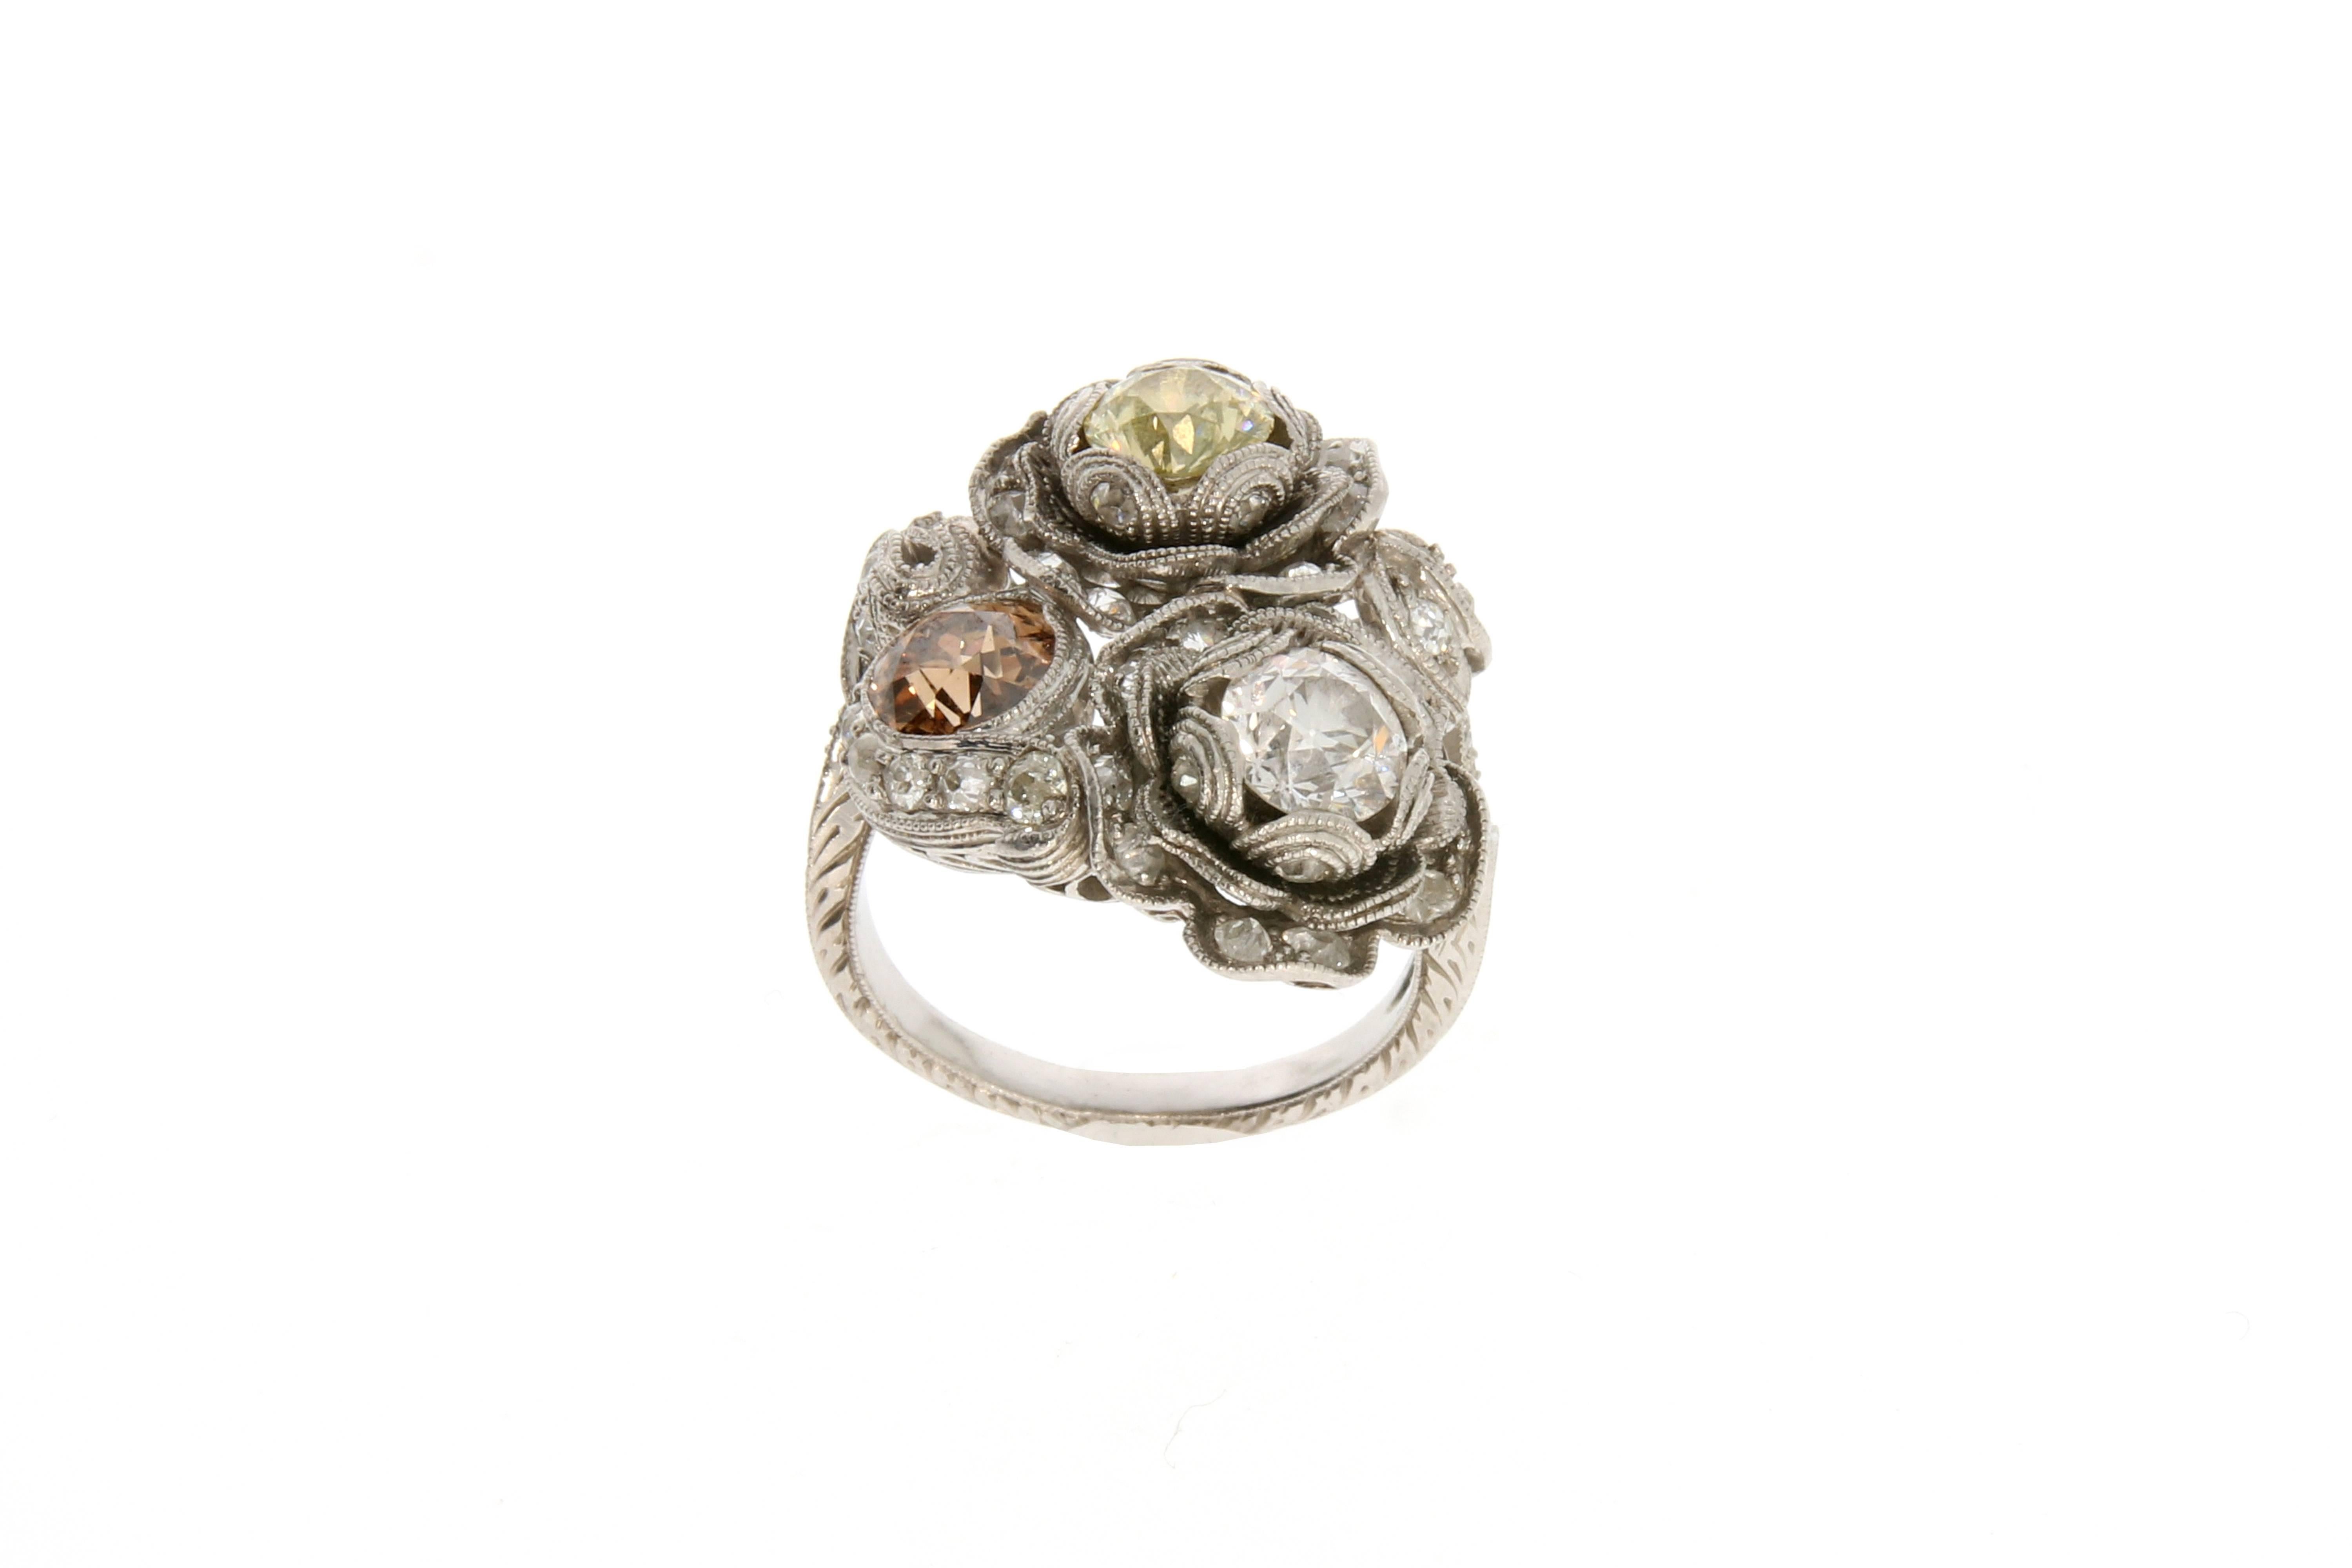 Exceptional filigree and floral platinum cocktail ring. The flowers are centred with two fancy coloured diamonds and one white diamond (fancy brown (circa 0.6 carats), fancy yellow (circa 0.5 carats)  and white (circa 0.6 carats).
34 brilliant